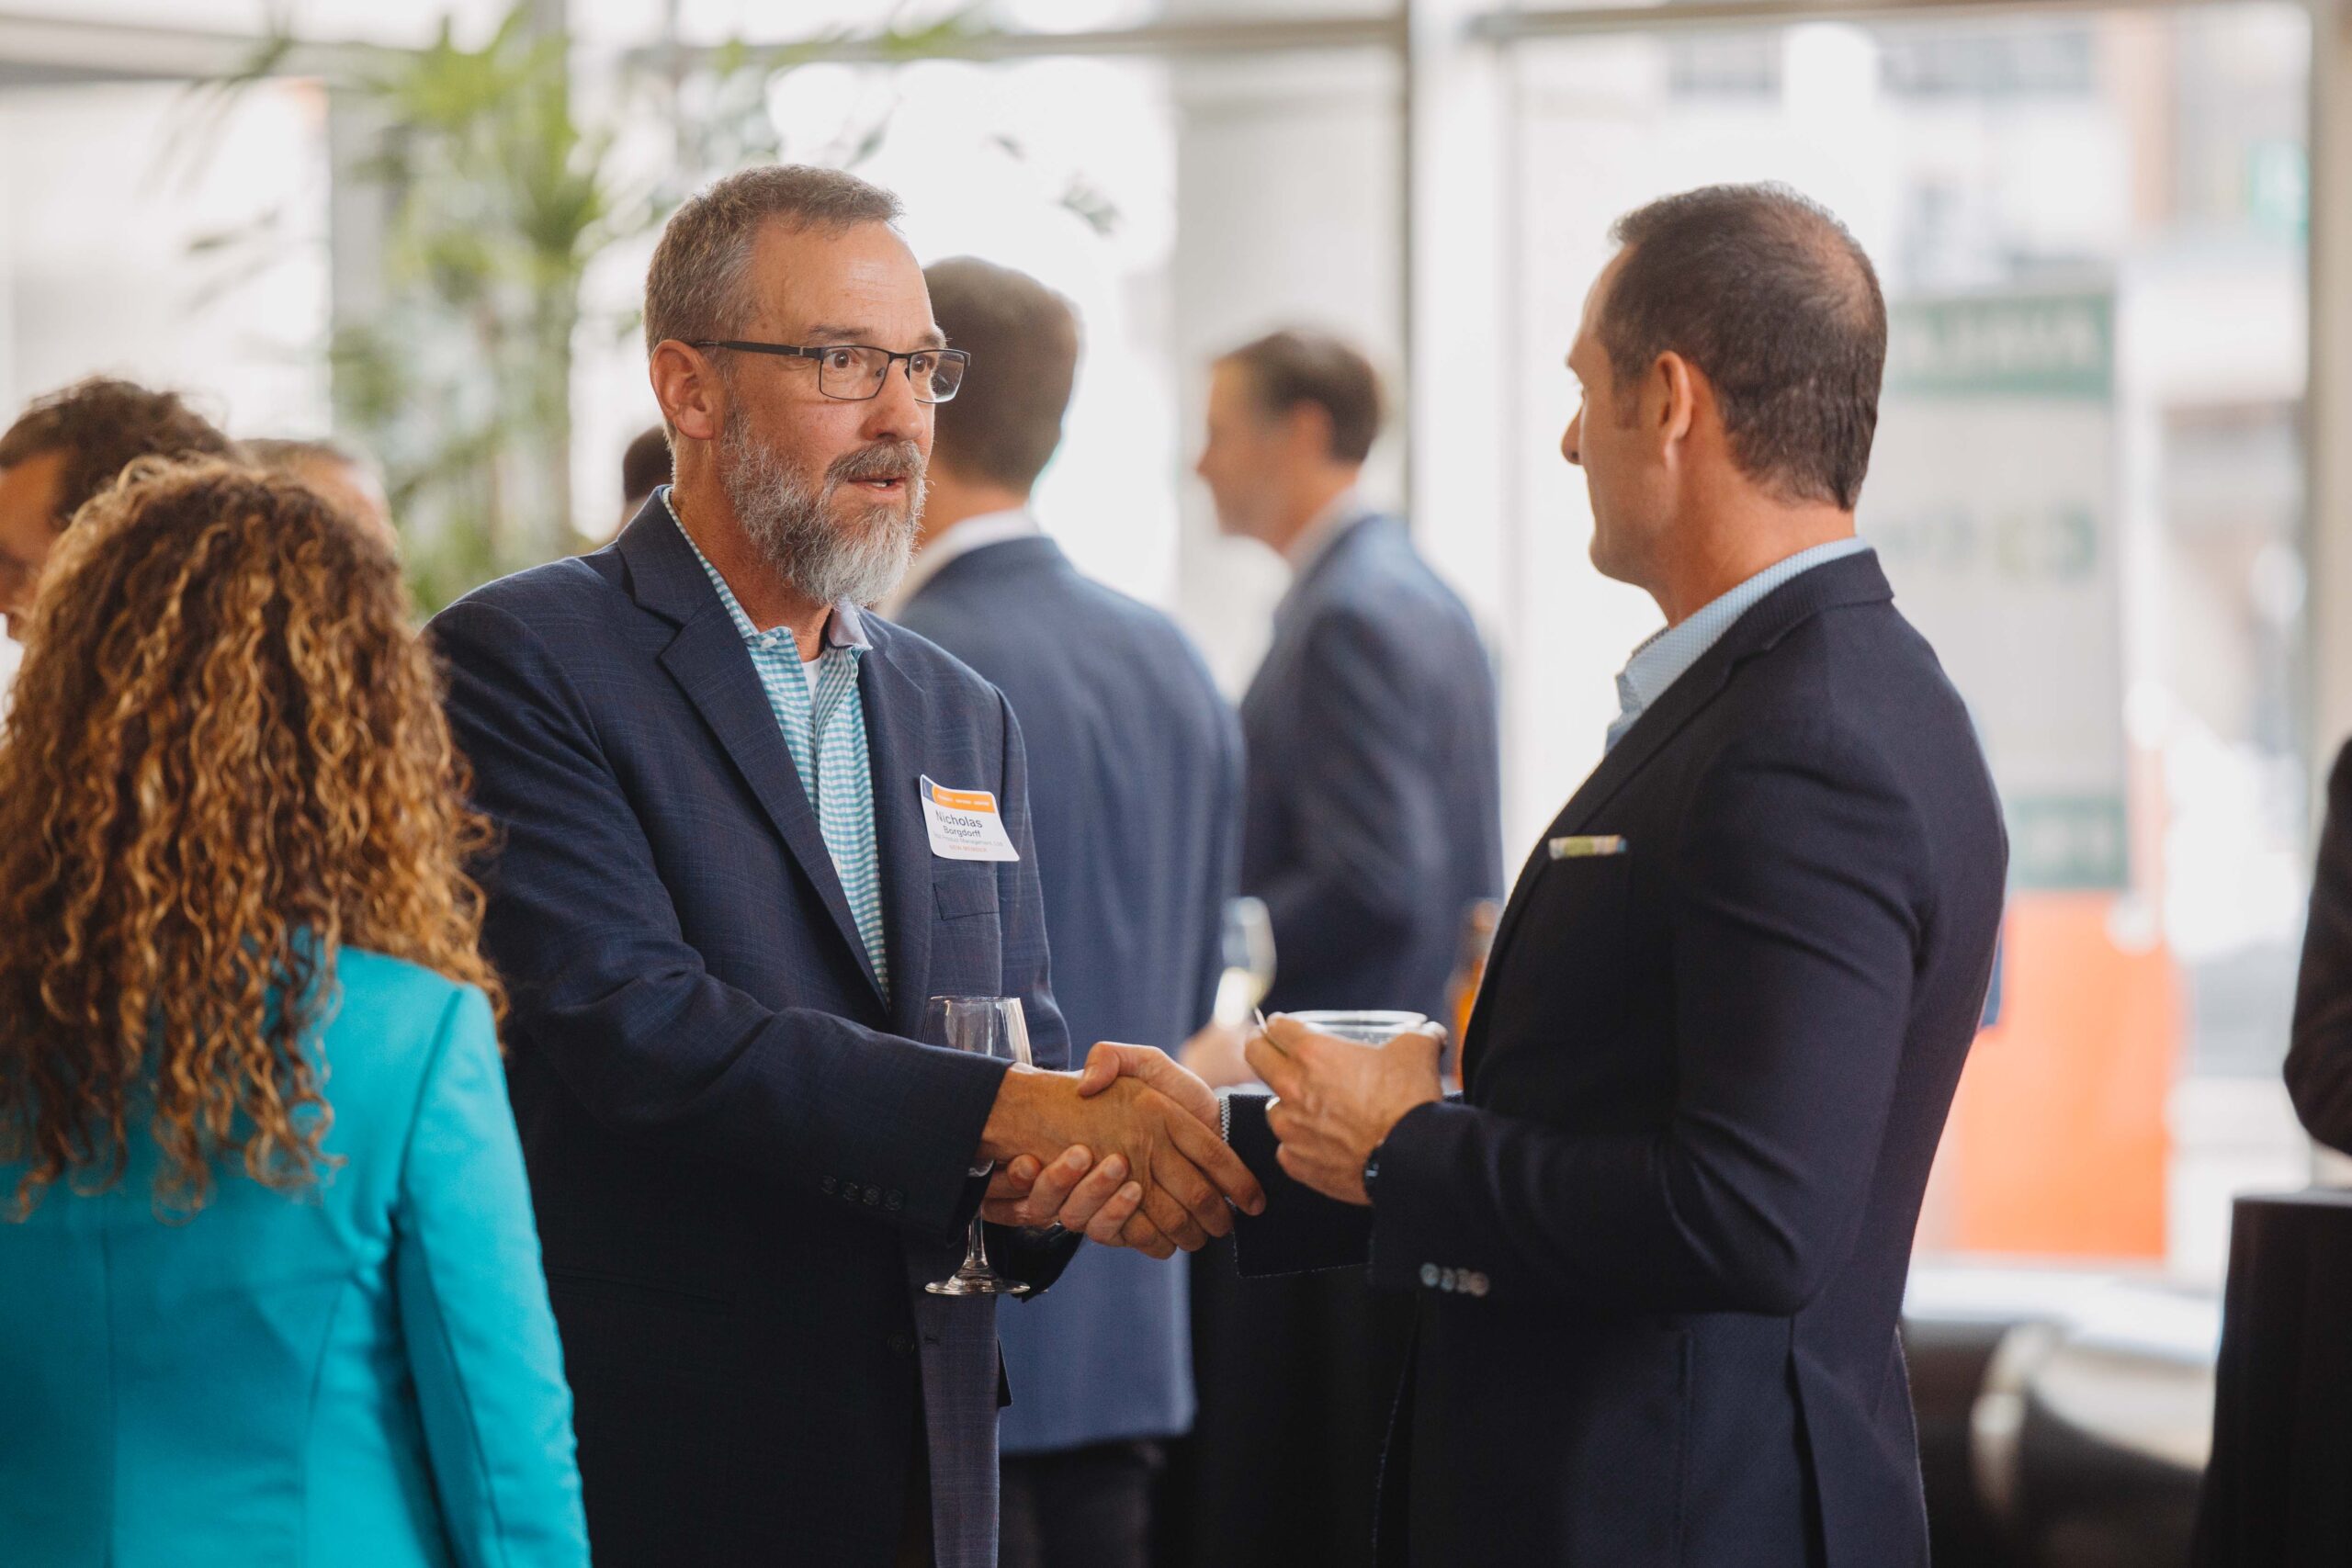 New Member Welcome Reception Gallery – The Economic Club of Grand Rapids